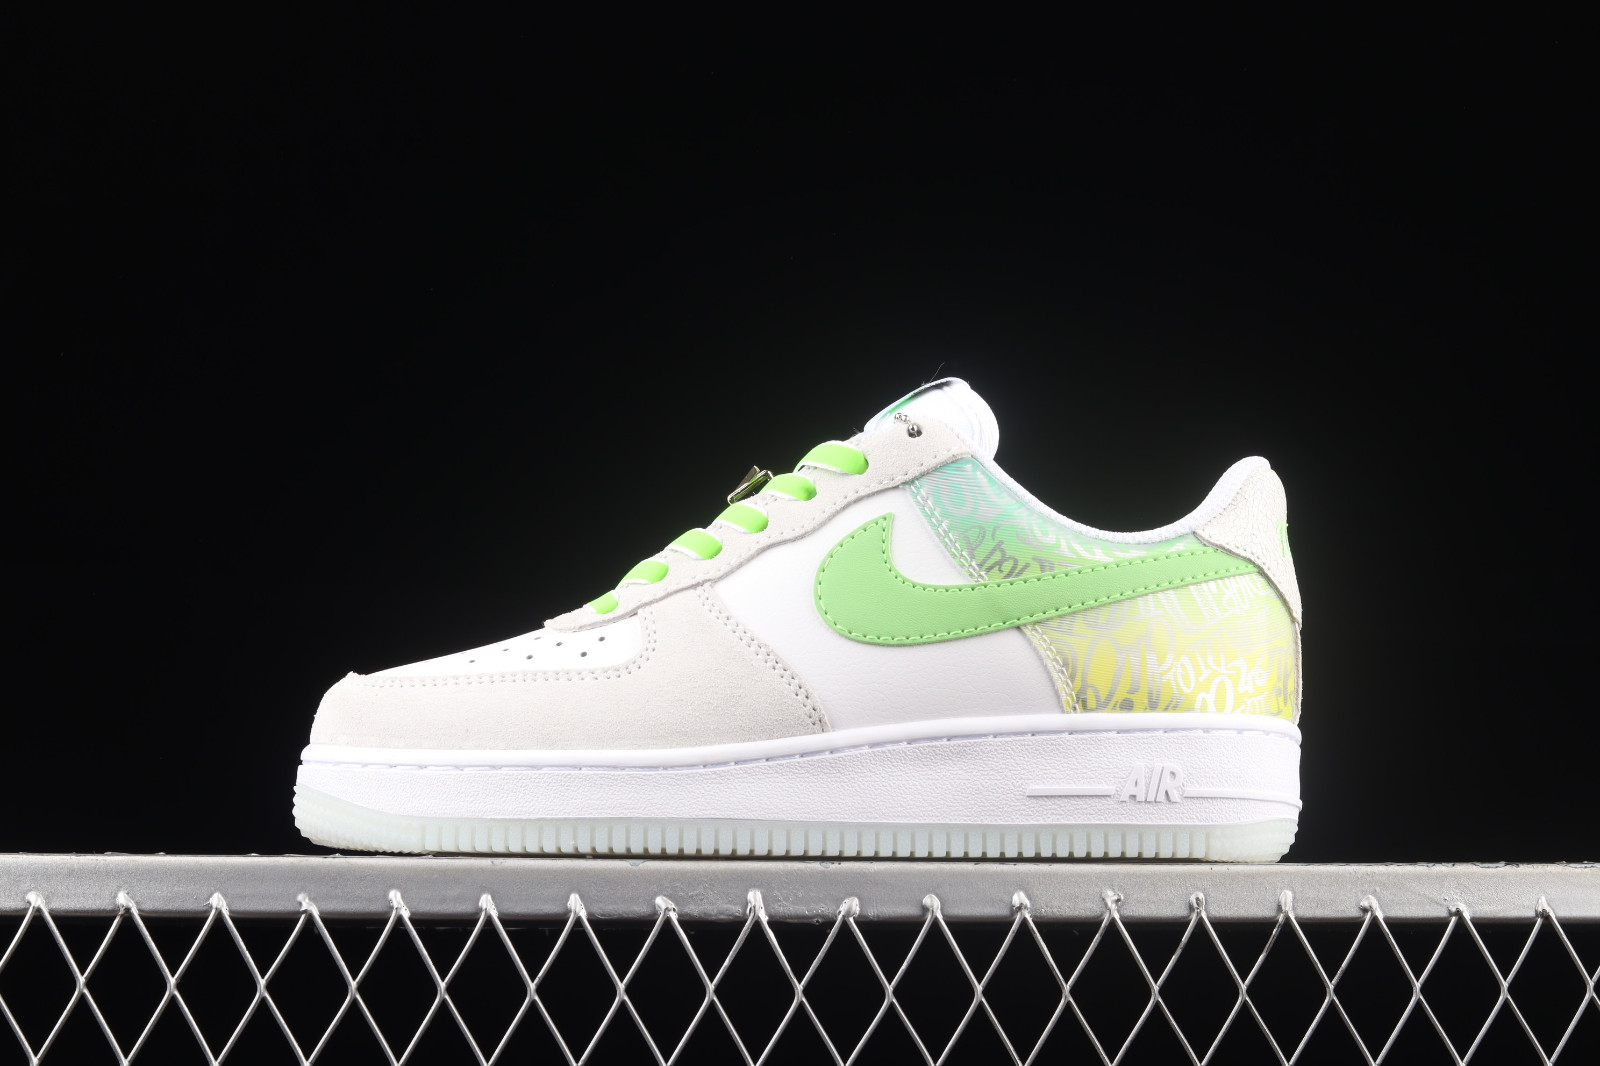 Nike Air Force 1 Low '07 First Use University Gold (Women's) - DA8302-700 -  US